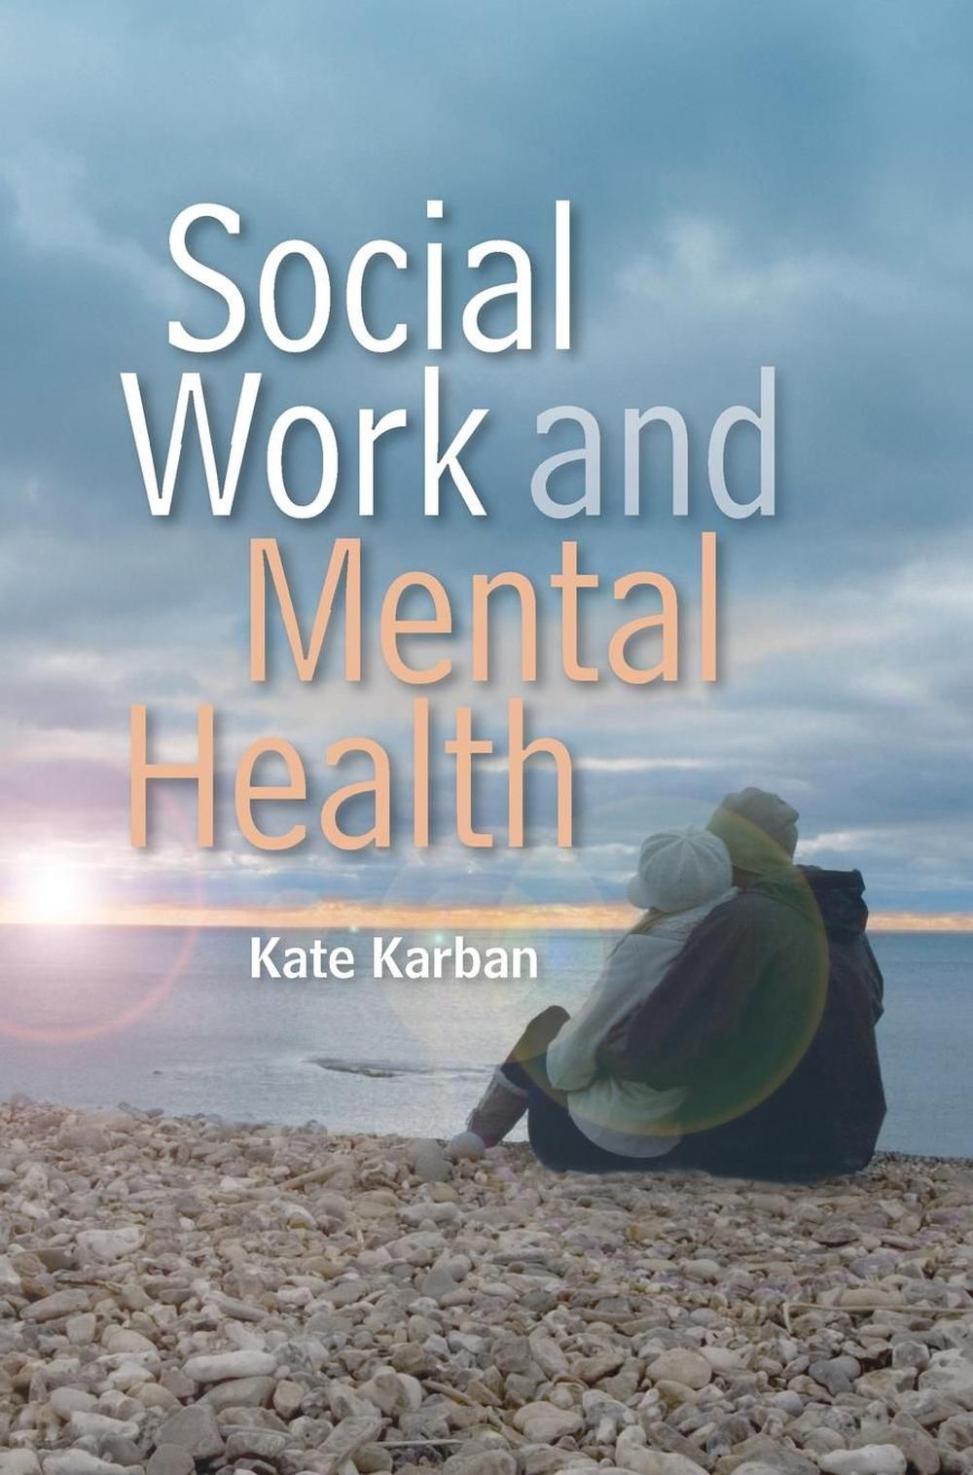 How Can Social Workers Use Book Reviews To Advocate For Social Change And Raise Awareness Of Importa